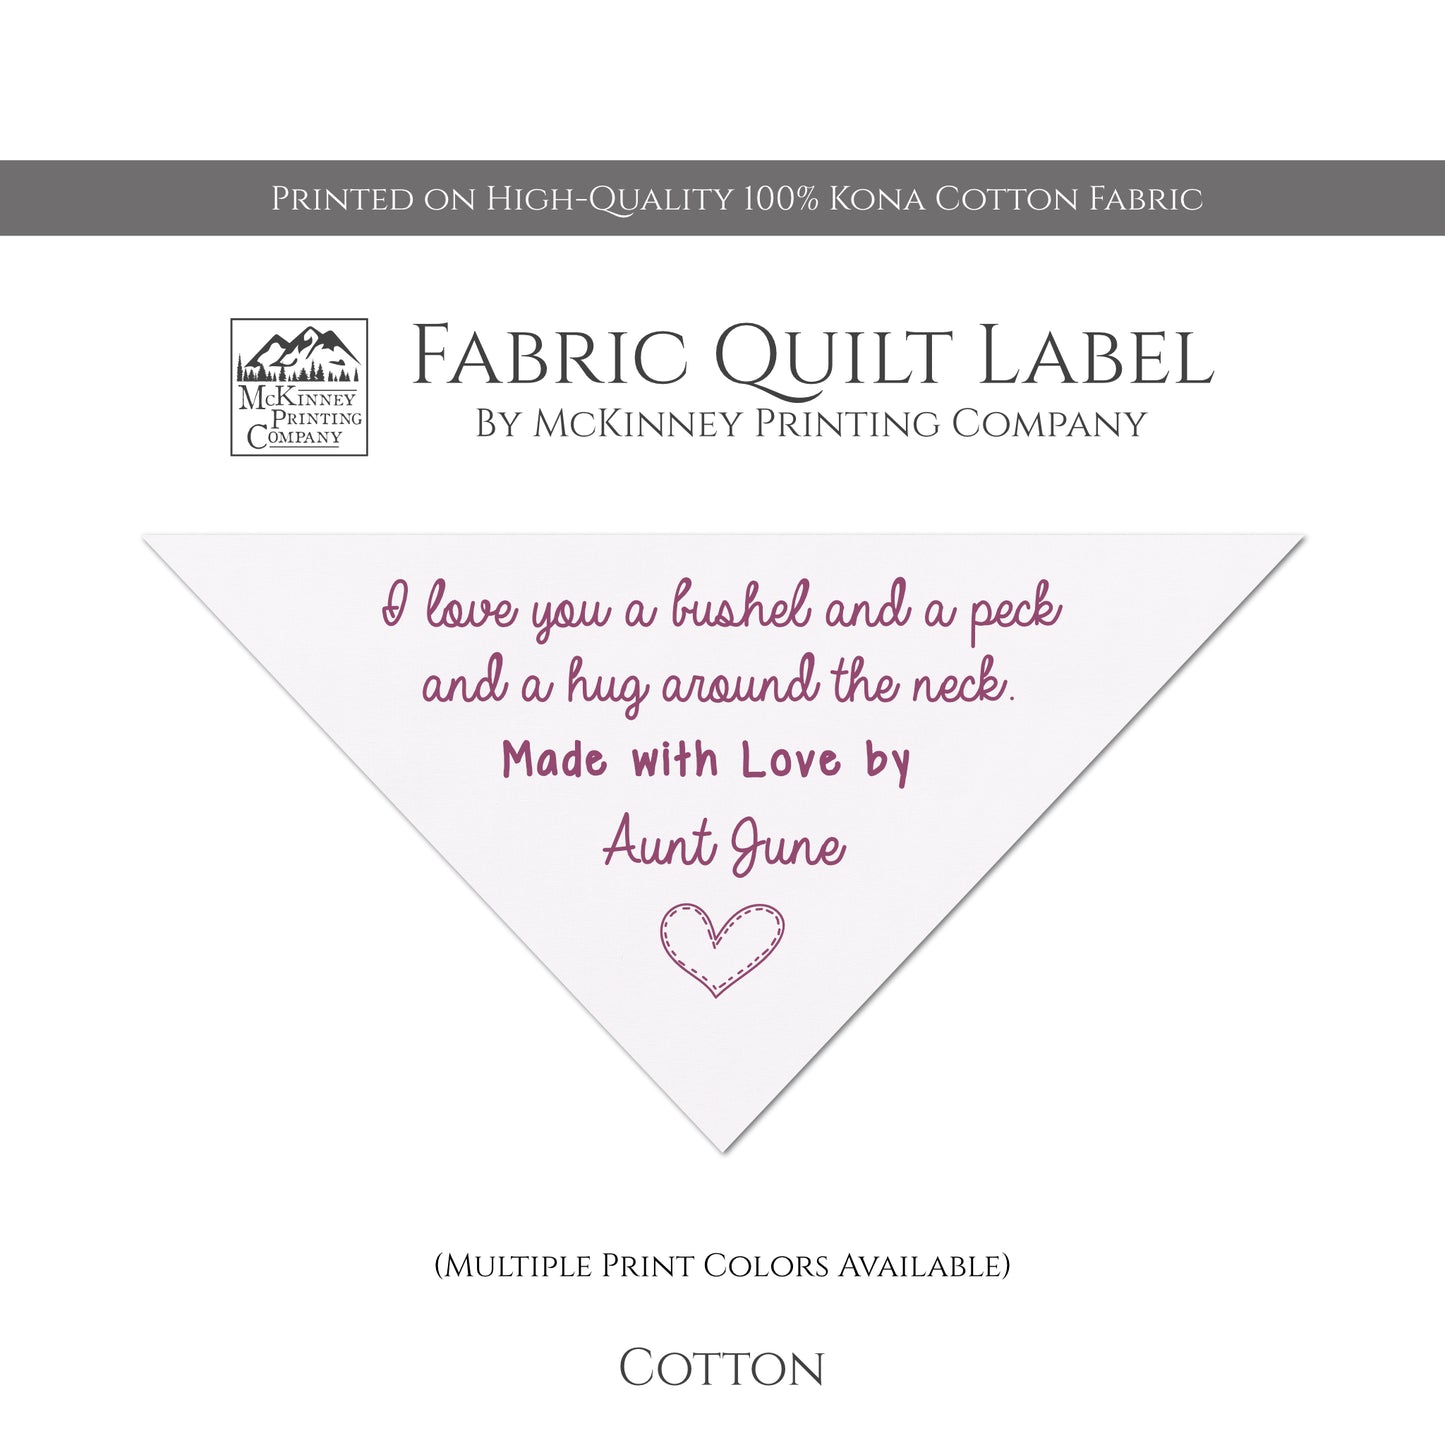 Corner Quilt Label - Triangle - I Love you a bushel and a peck and a hug around the neck - Made with Love - Custom Name - Kona Cotton Fabric, White